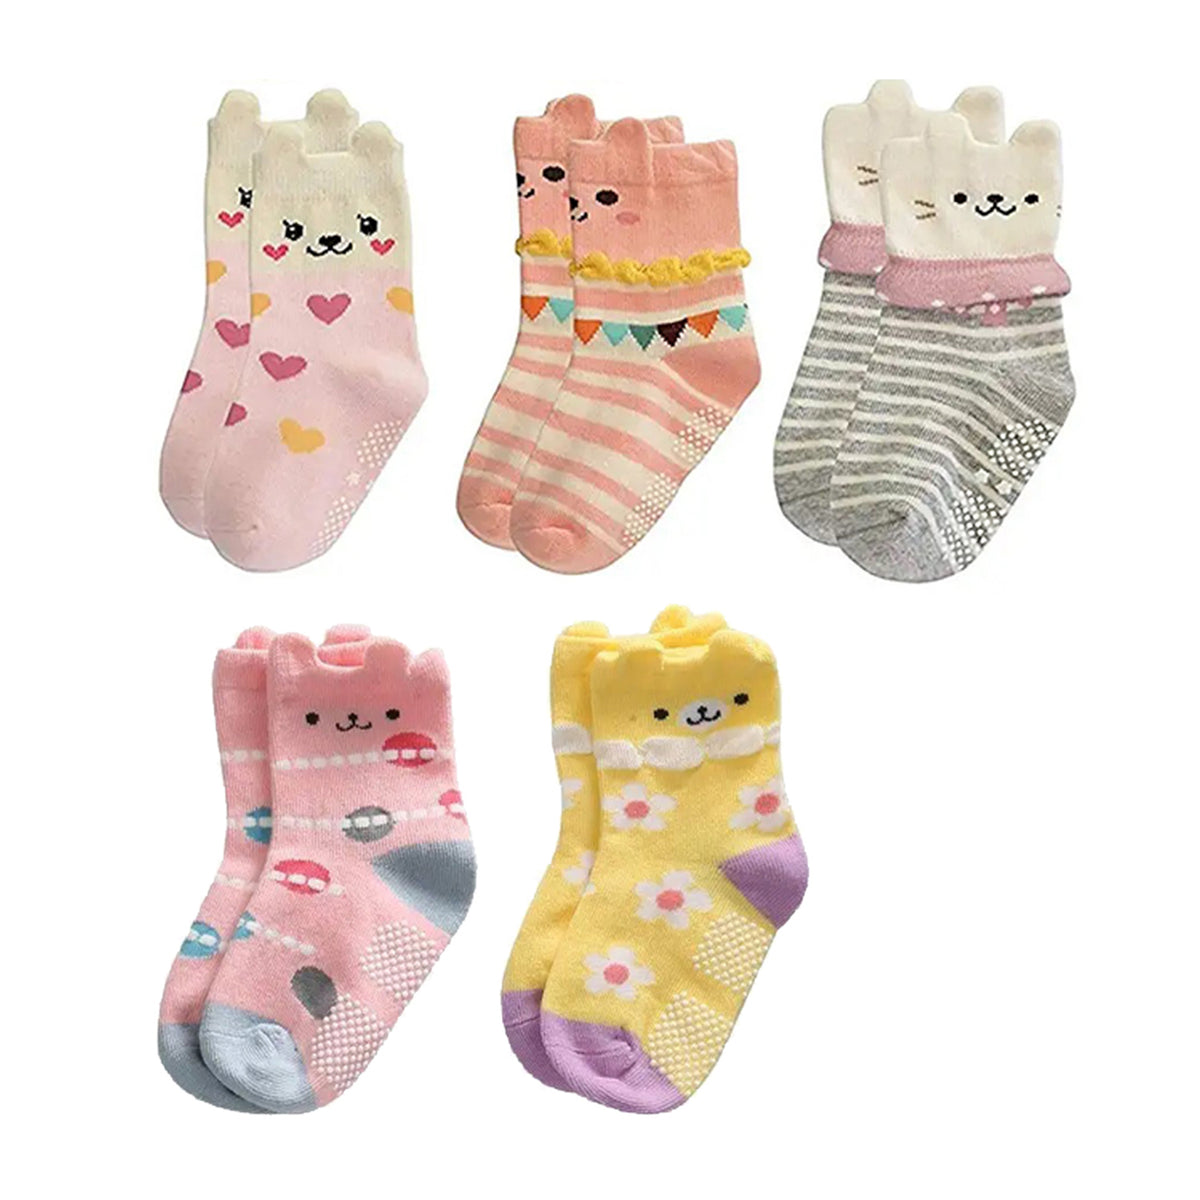 Baby's Organic Cotton Anti-Skid Socks (Multicolour, Mix Designs) - Pack of  Any 5 Pairs - 0-6 Months